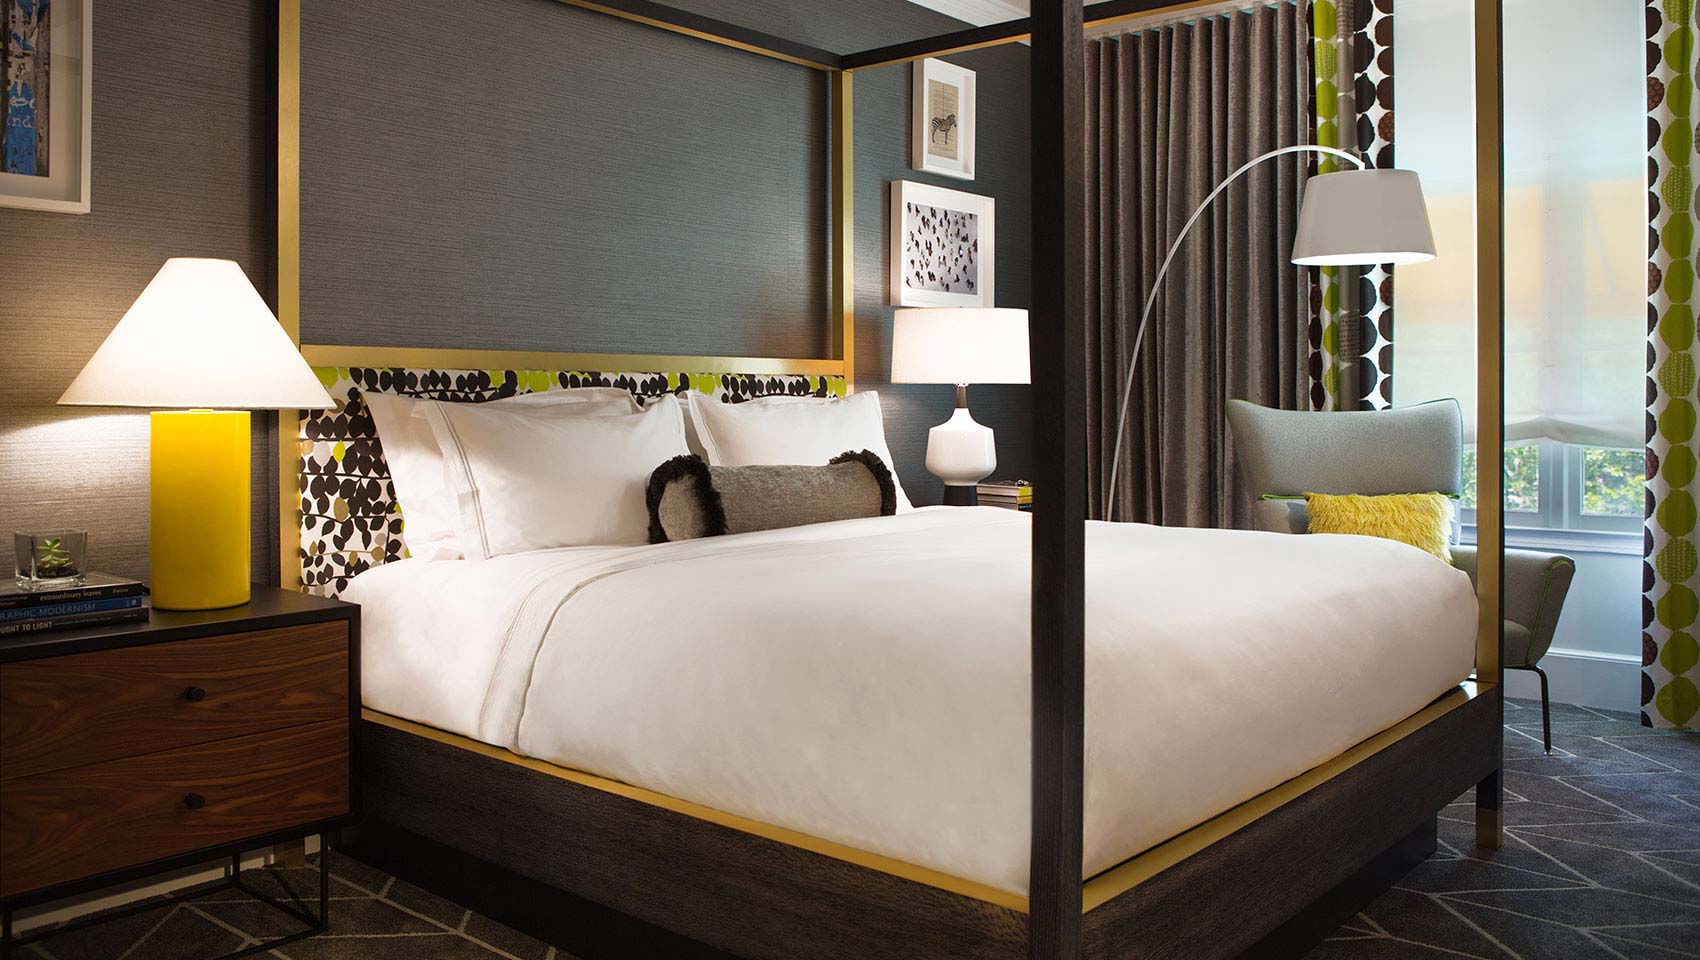 The Kimpton Brice Hotel guestroom canopy bed